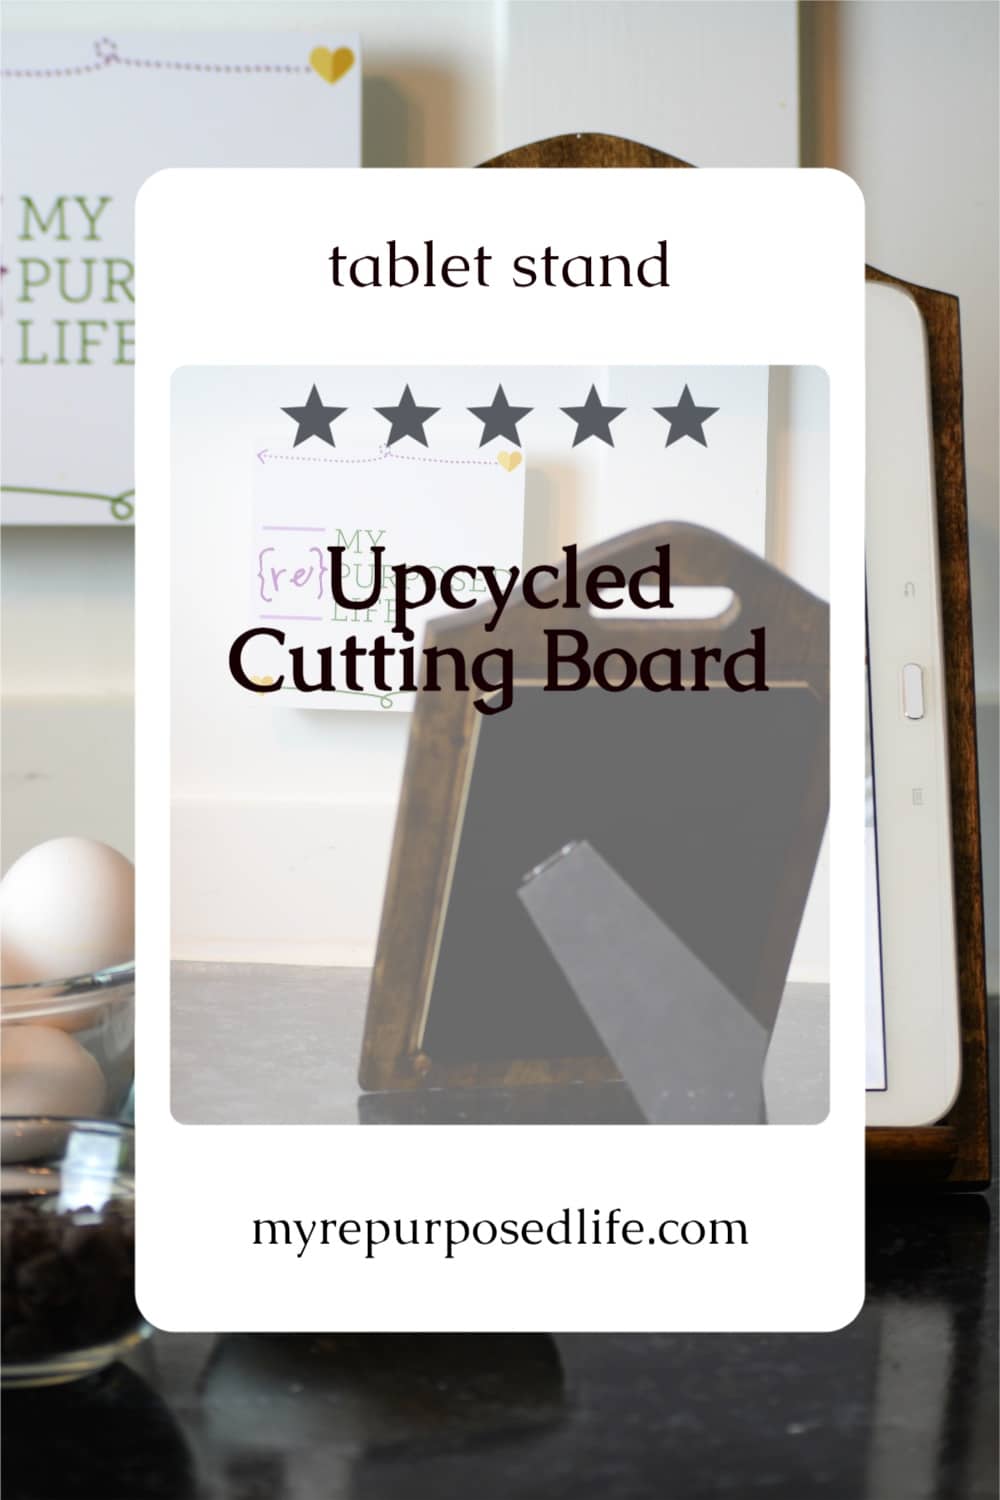 Easy iPad or Tablet Stand, doubles as a cookbook holder! No special tools required, so easy your kids could make it for you! Easy AND frugal, it doesn't get any better than this. #MyRepurposedLife #iPad #stand #tablet #diy #easy #project via @repurposedlife